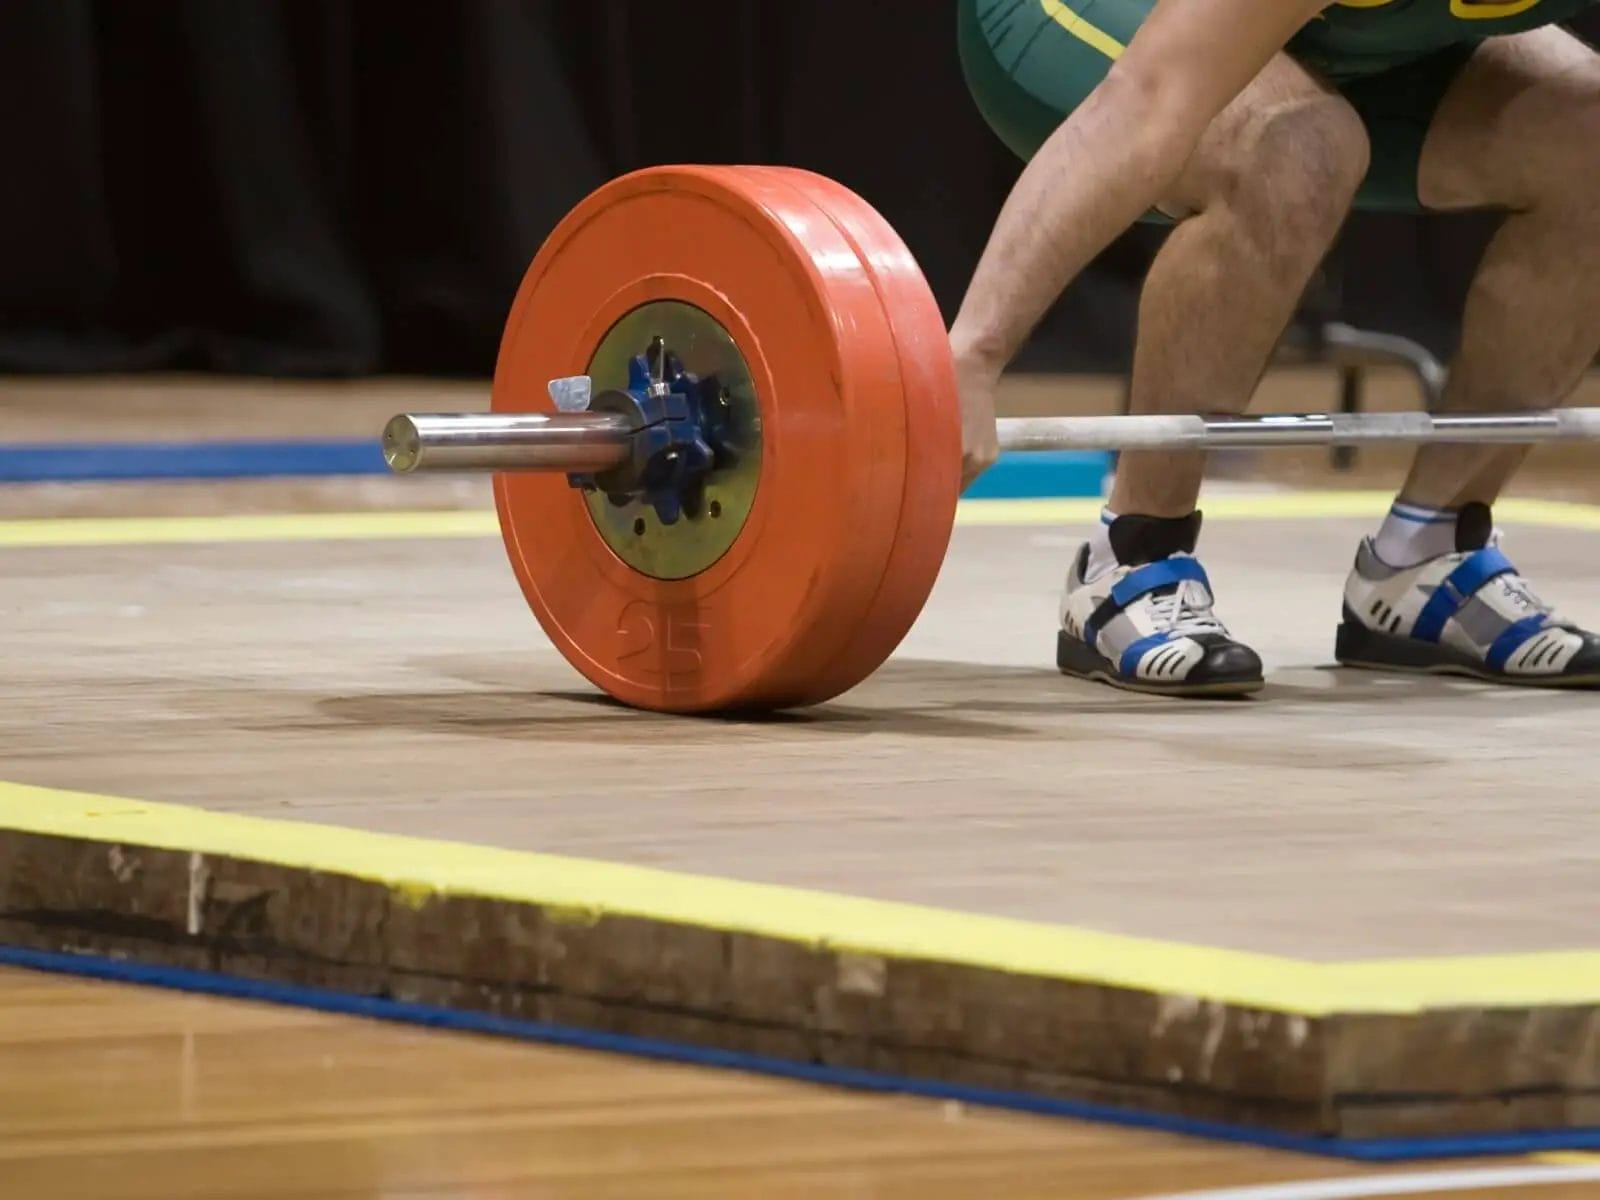 Olympic weight lifter wearing adidas adistar shoes preparing for clean and jerk.